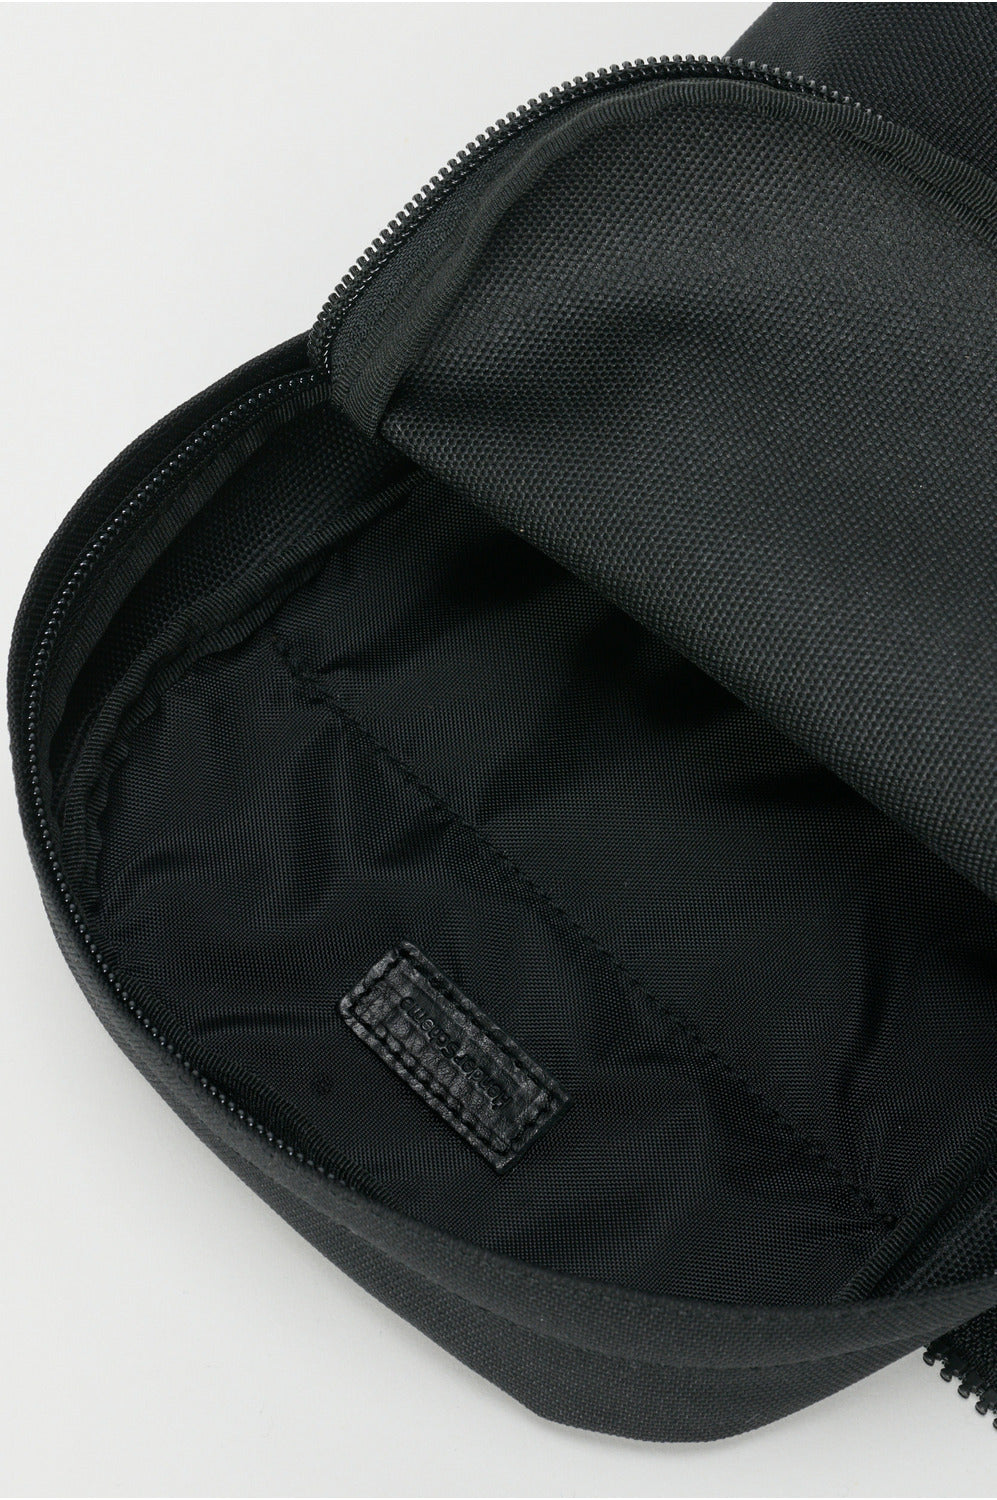 Hender Scheme double pocket pack – unexpected store